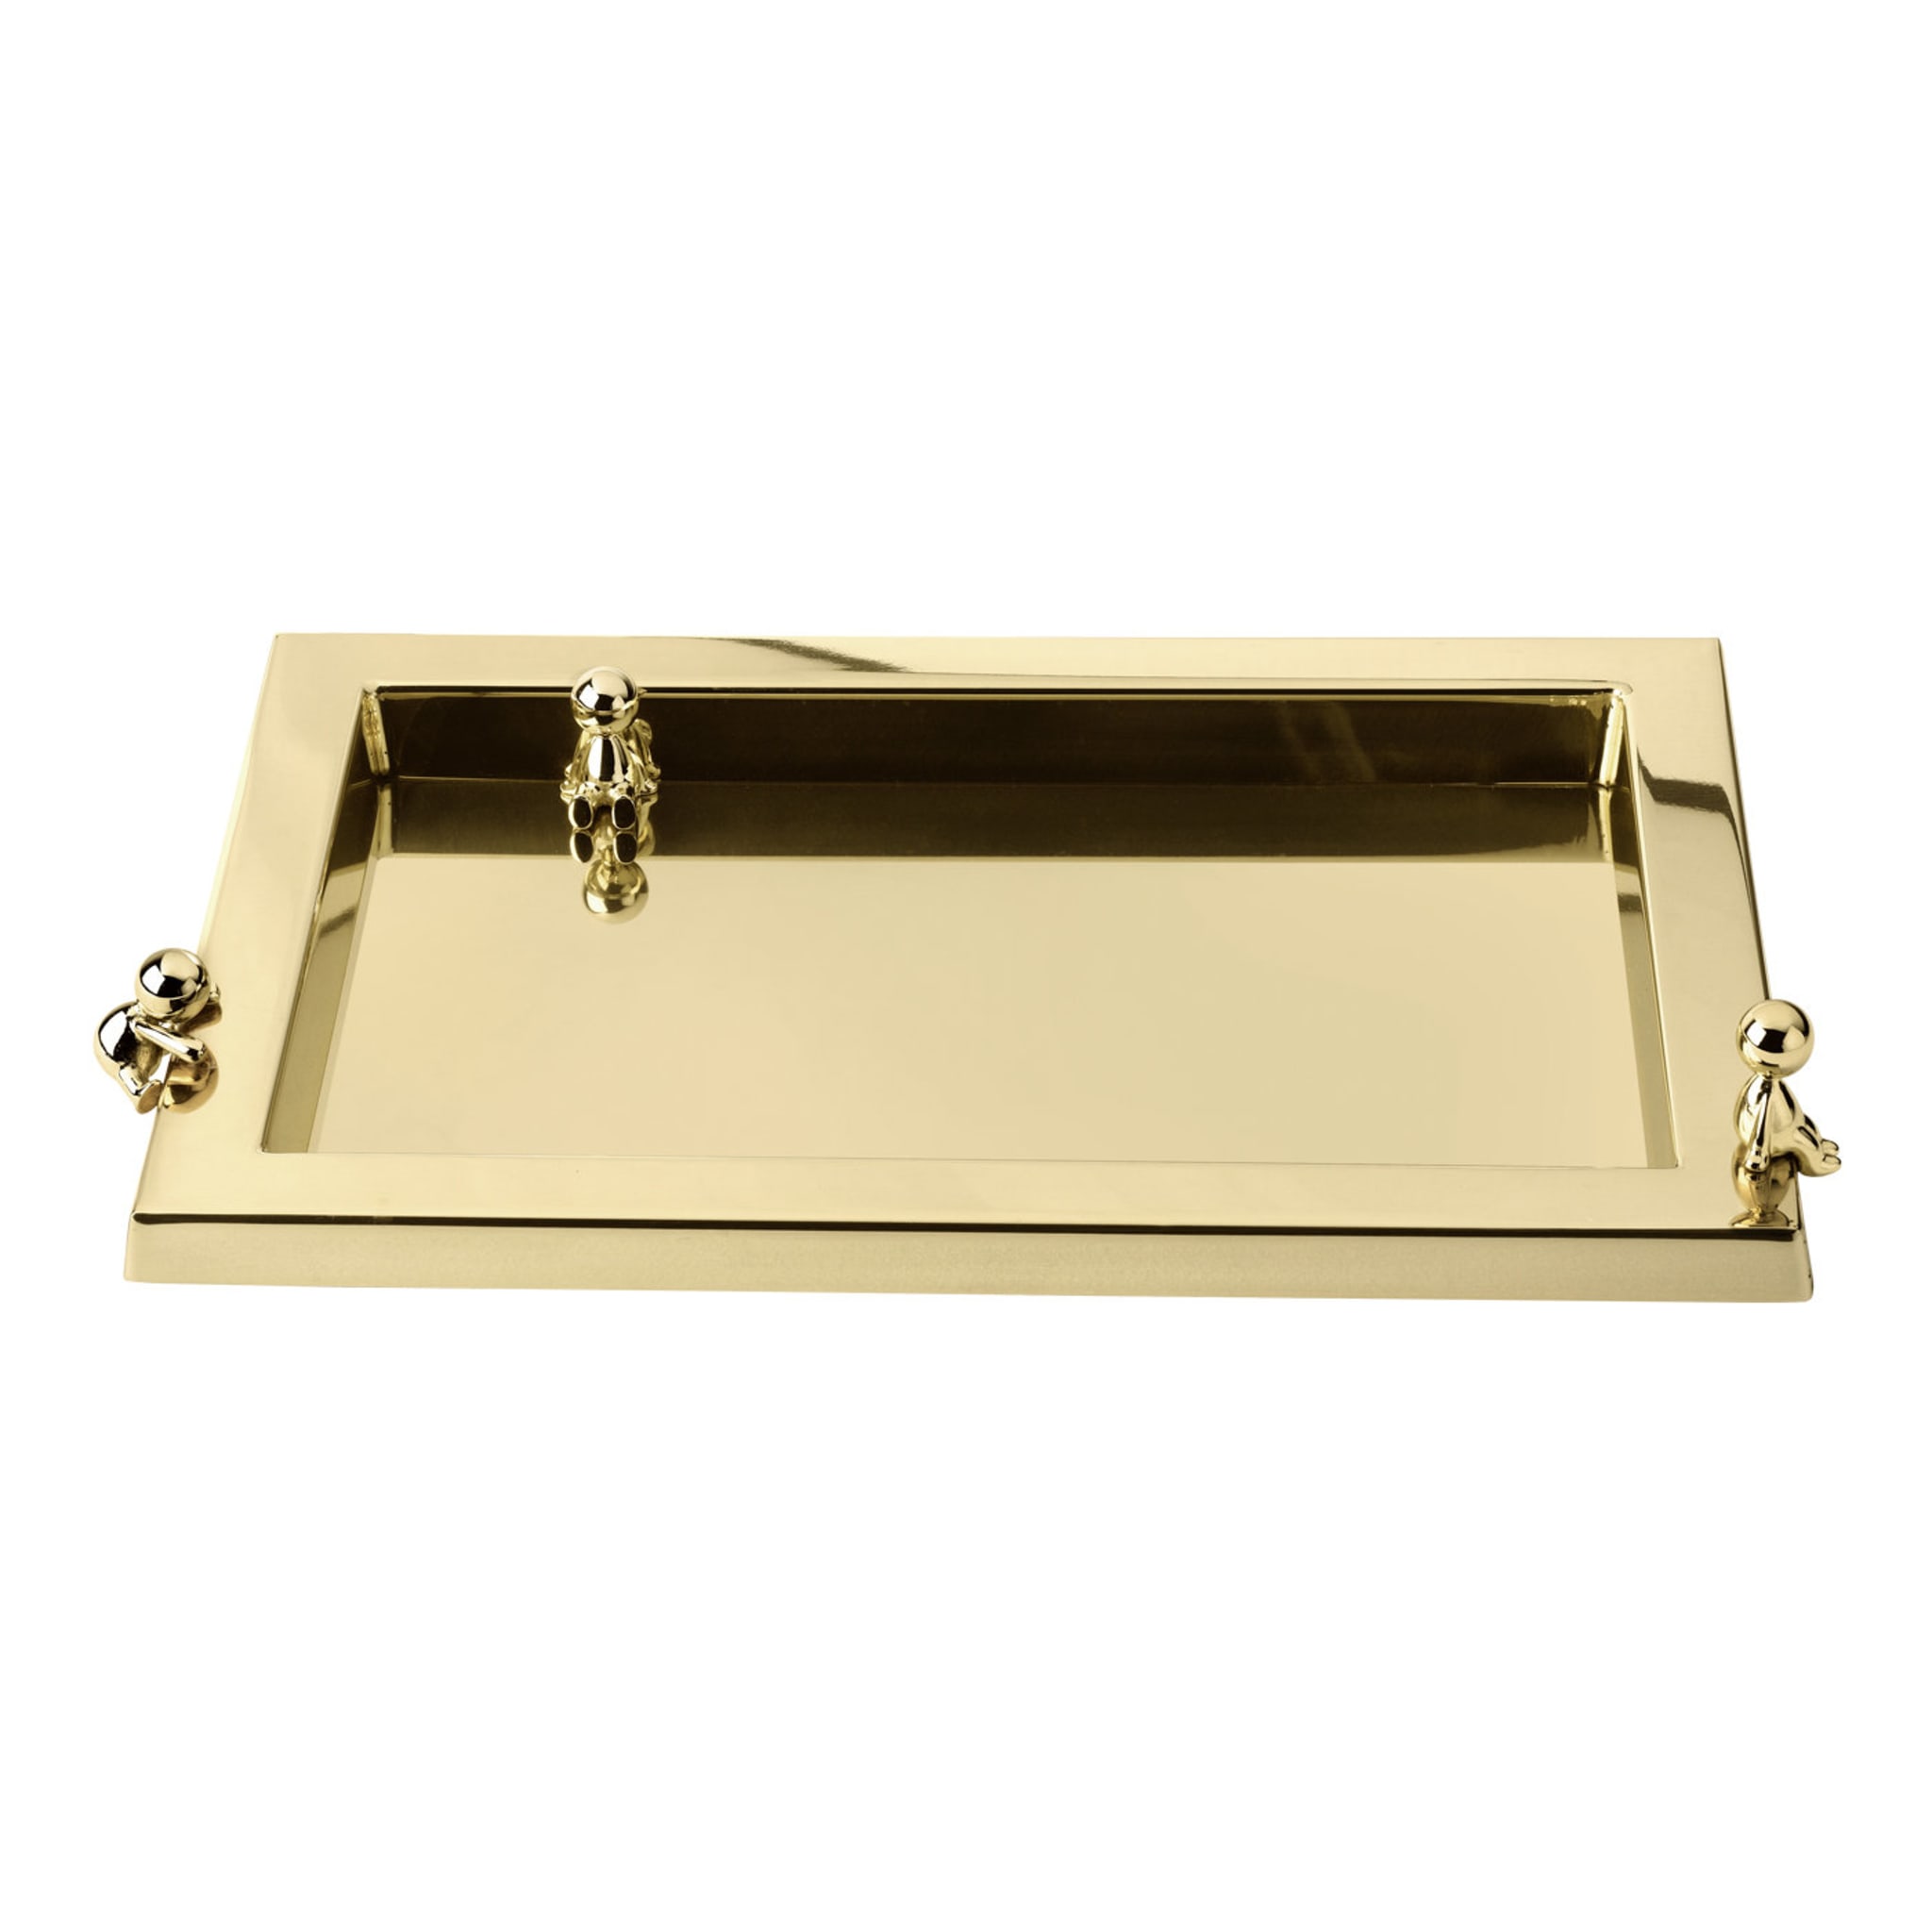 Omini Tray in Polished Brass By Stefano Giovannoni - Main view